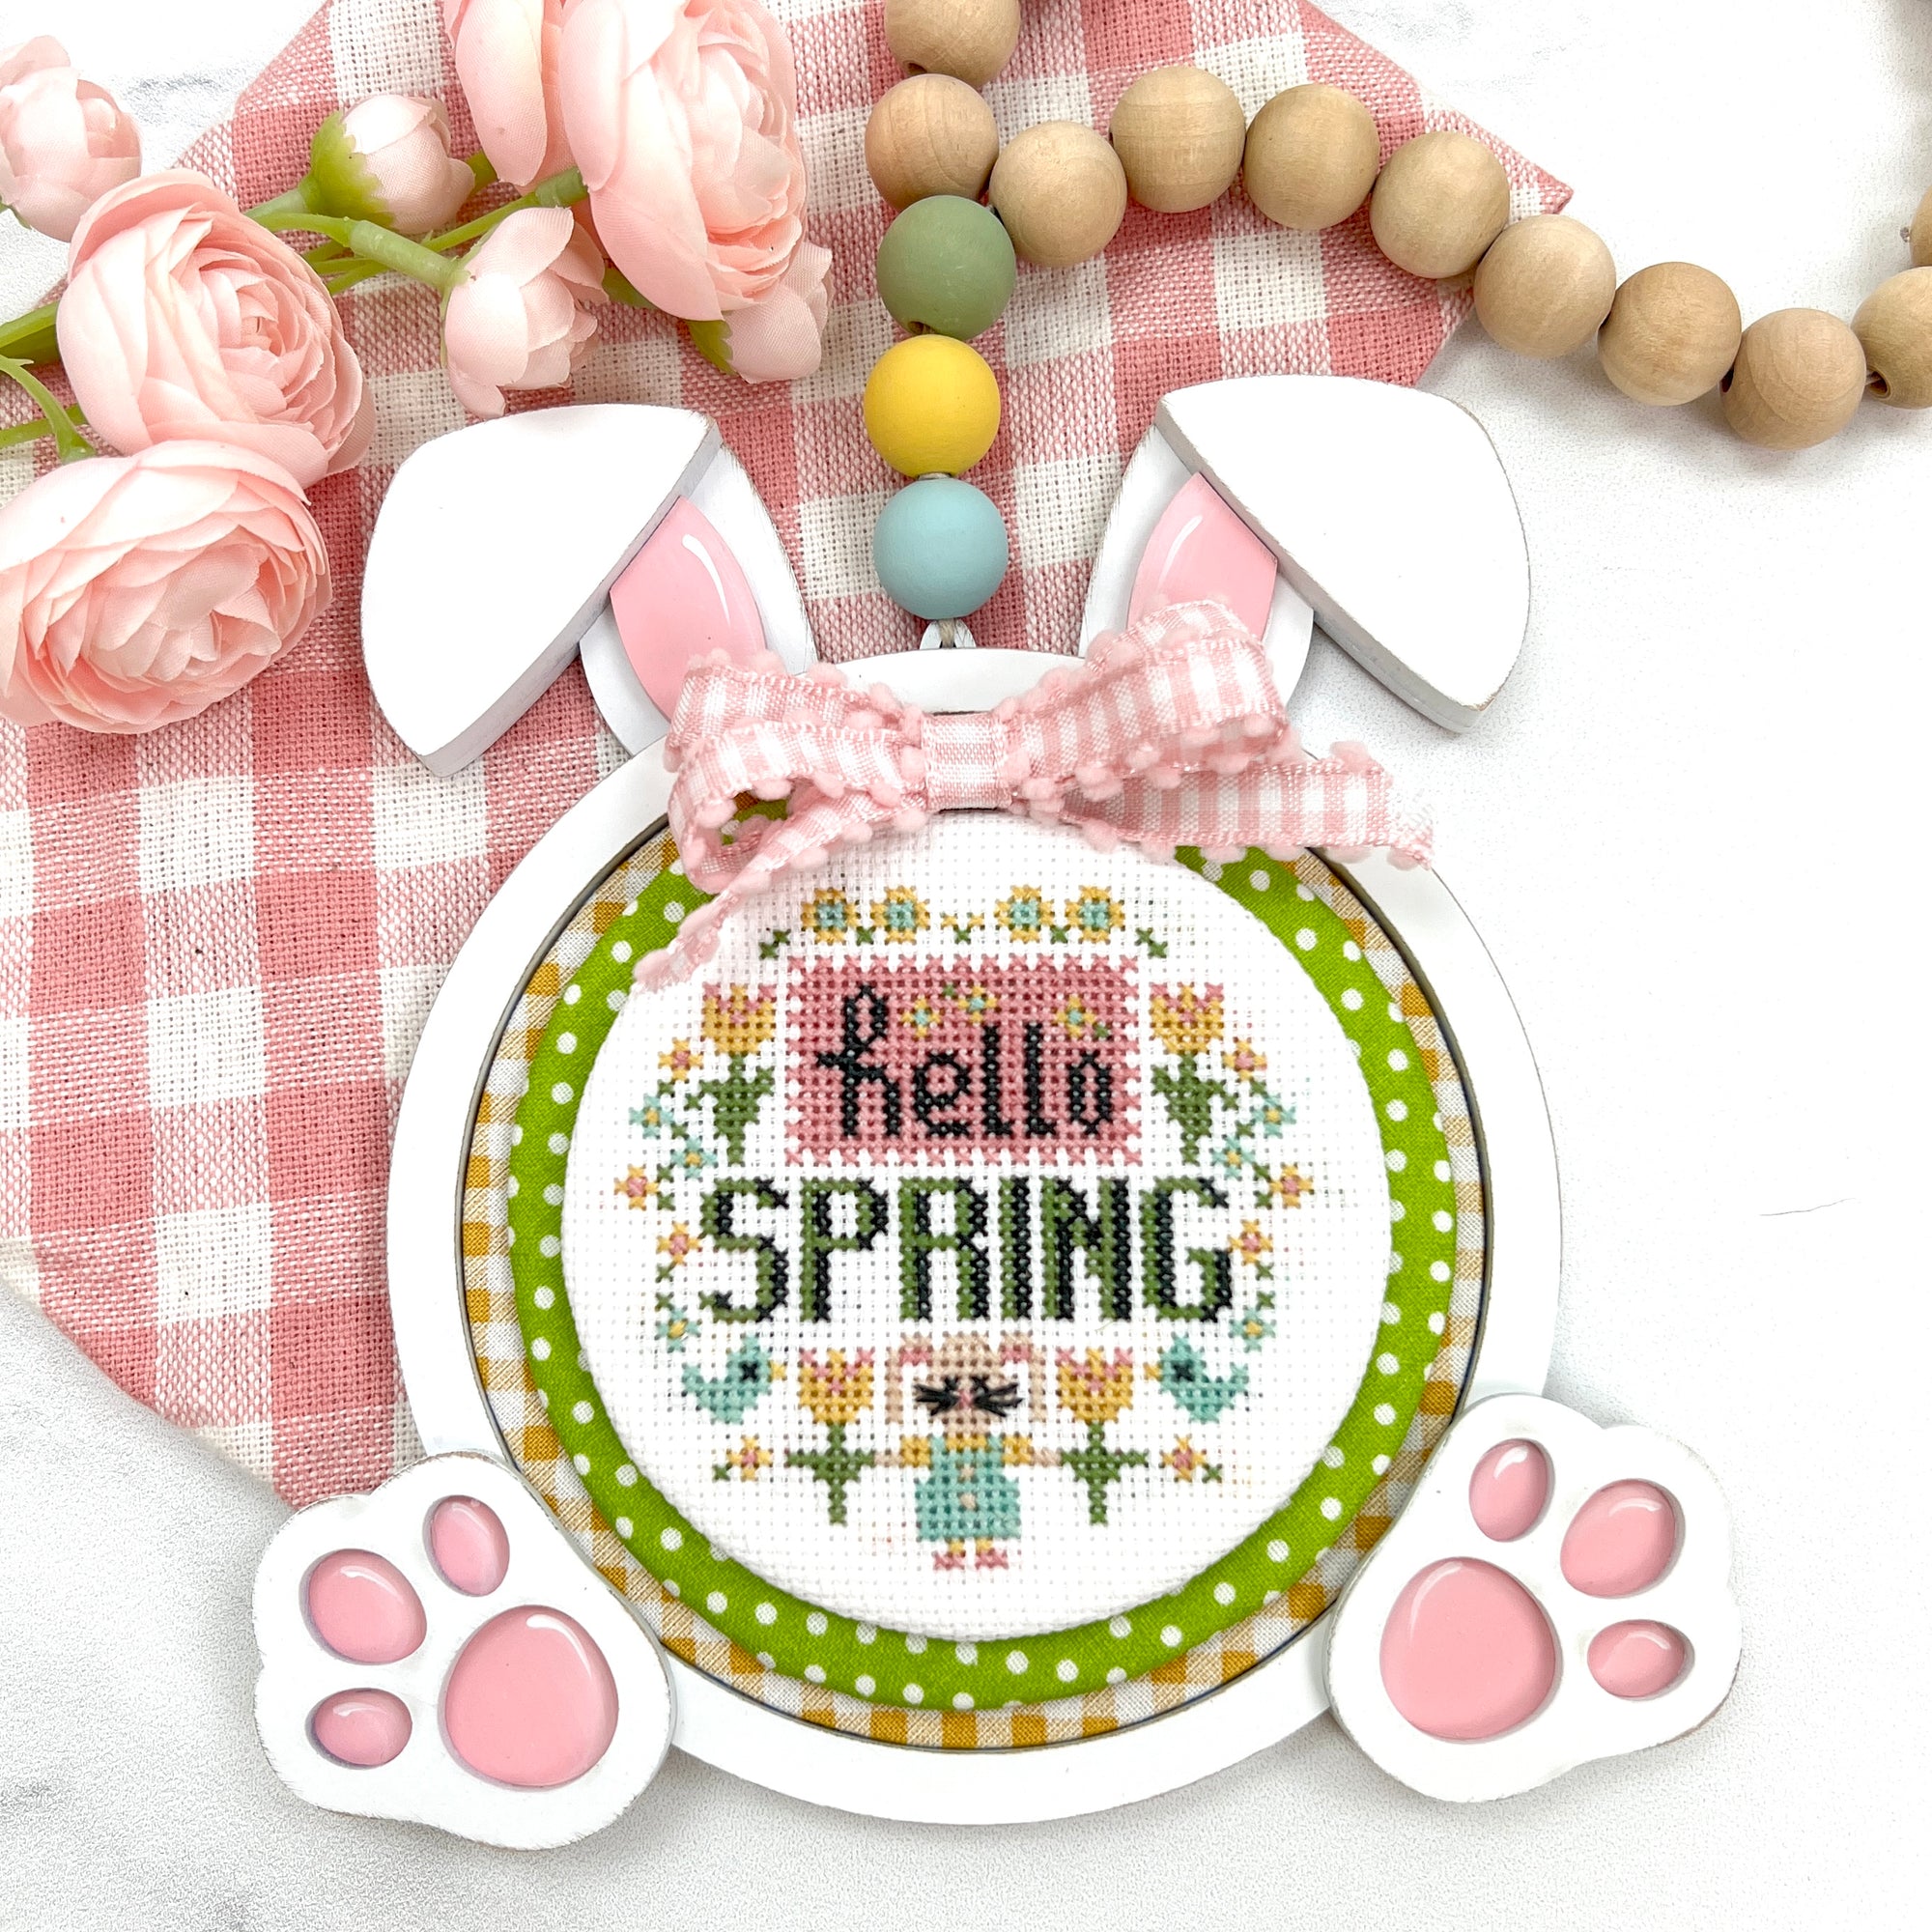 Hanging bunny wood cross stitch display for round cross stitch pieces